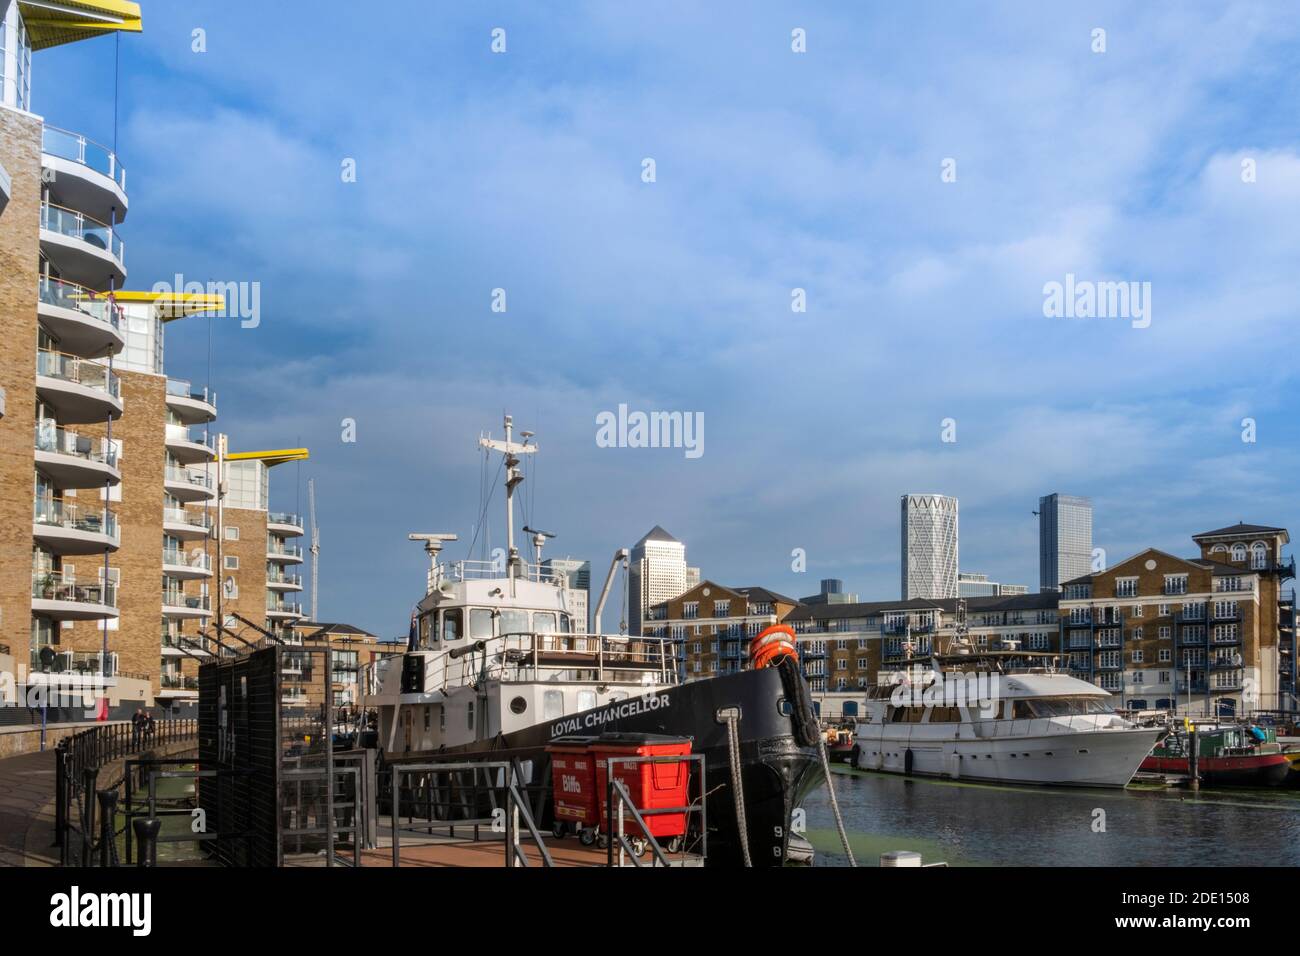 Boats moored in the marina next to modern residential apartments, Limehouse Basin, Regents Canal, Tower Hamlets, London, England, United Kingdom Stock Photo